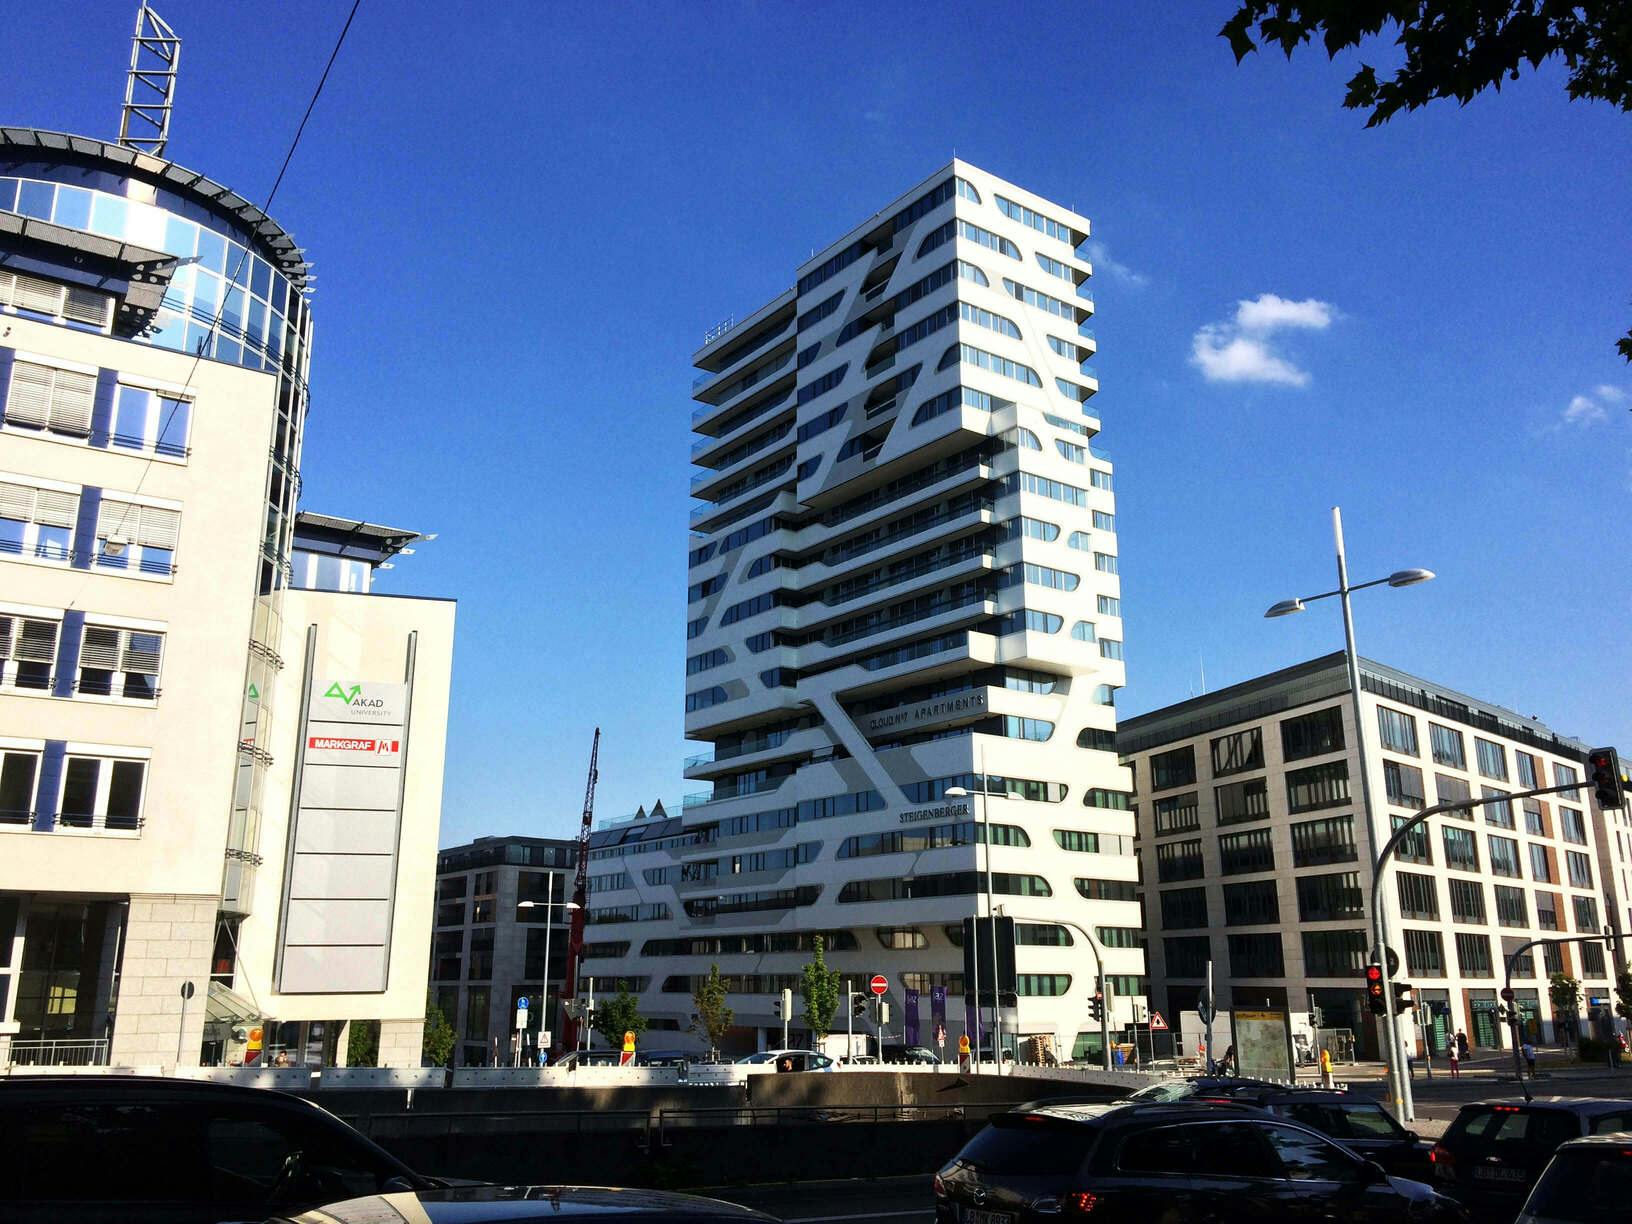 Equinox Founding Partner Noémi was leading the team generating construction and building permission materials as well as coordinating interior design for several apartments and clients for the 18-storey hotel and serviced apartments building in central Stuttgart.